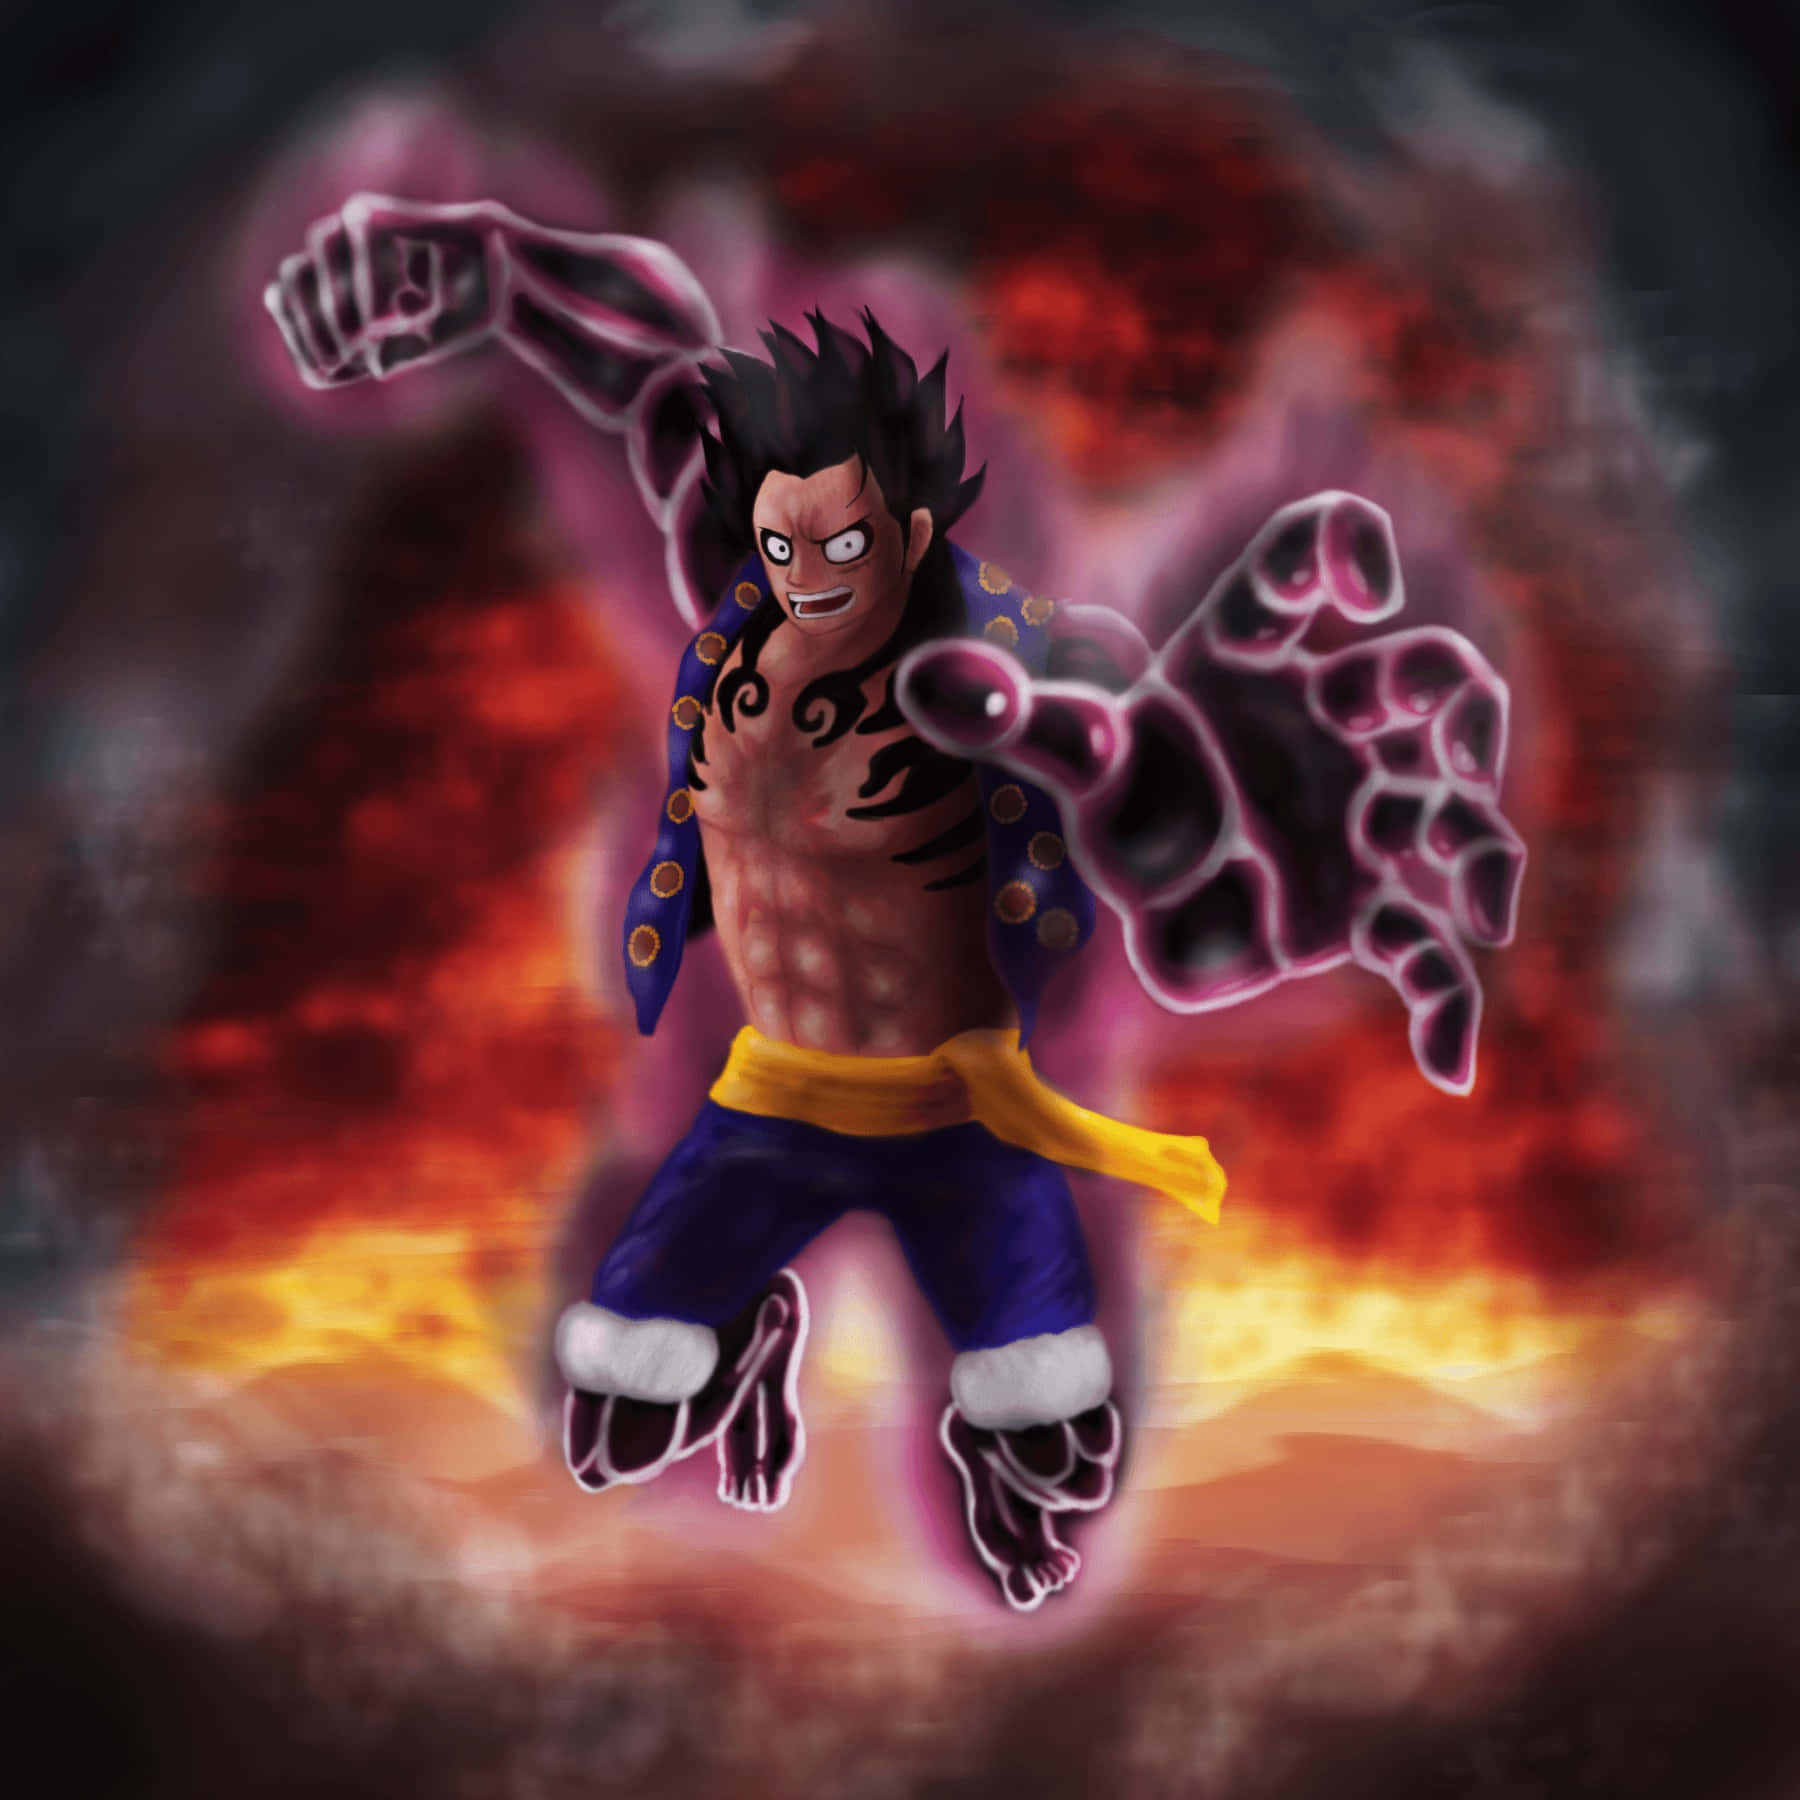 "Gear 5: The Most Powerful Form of Monkey D. Luffy" Wallpaper